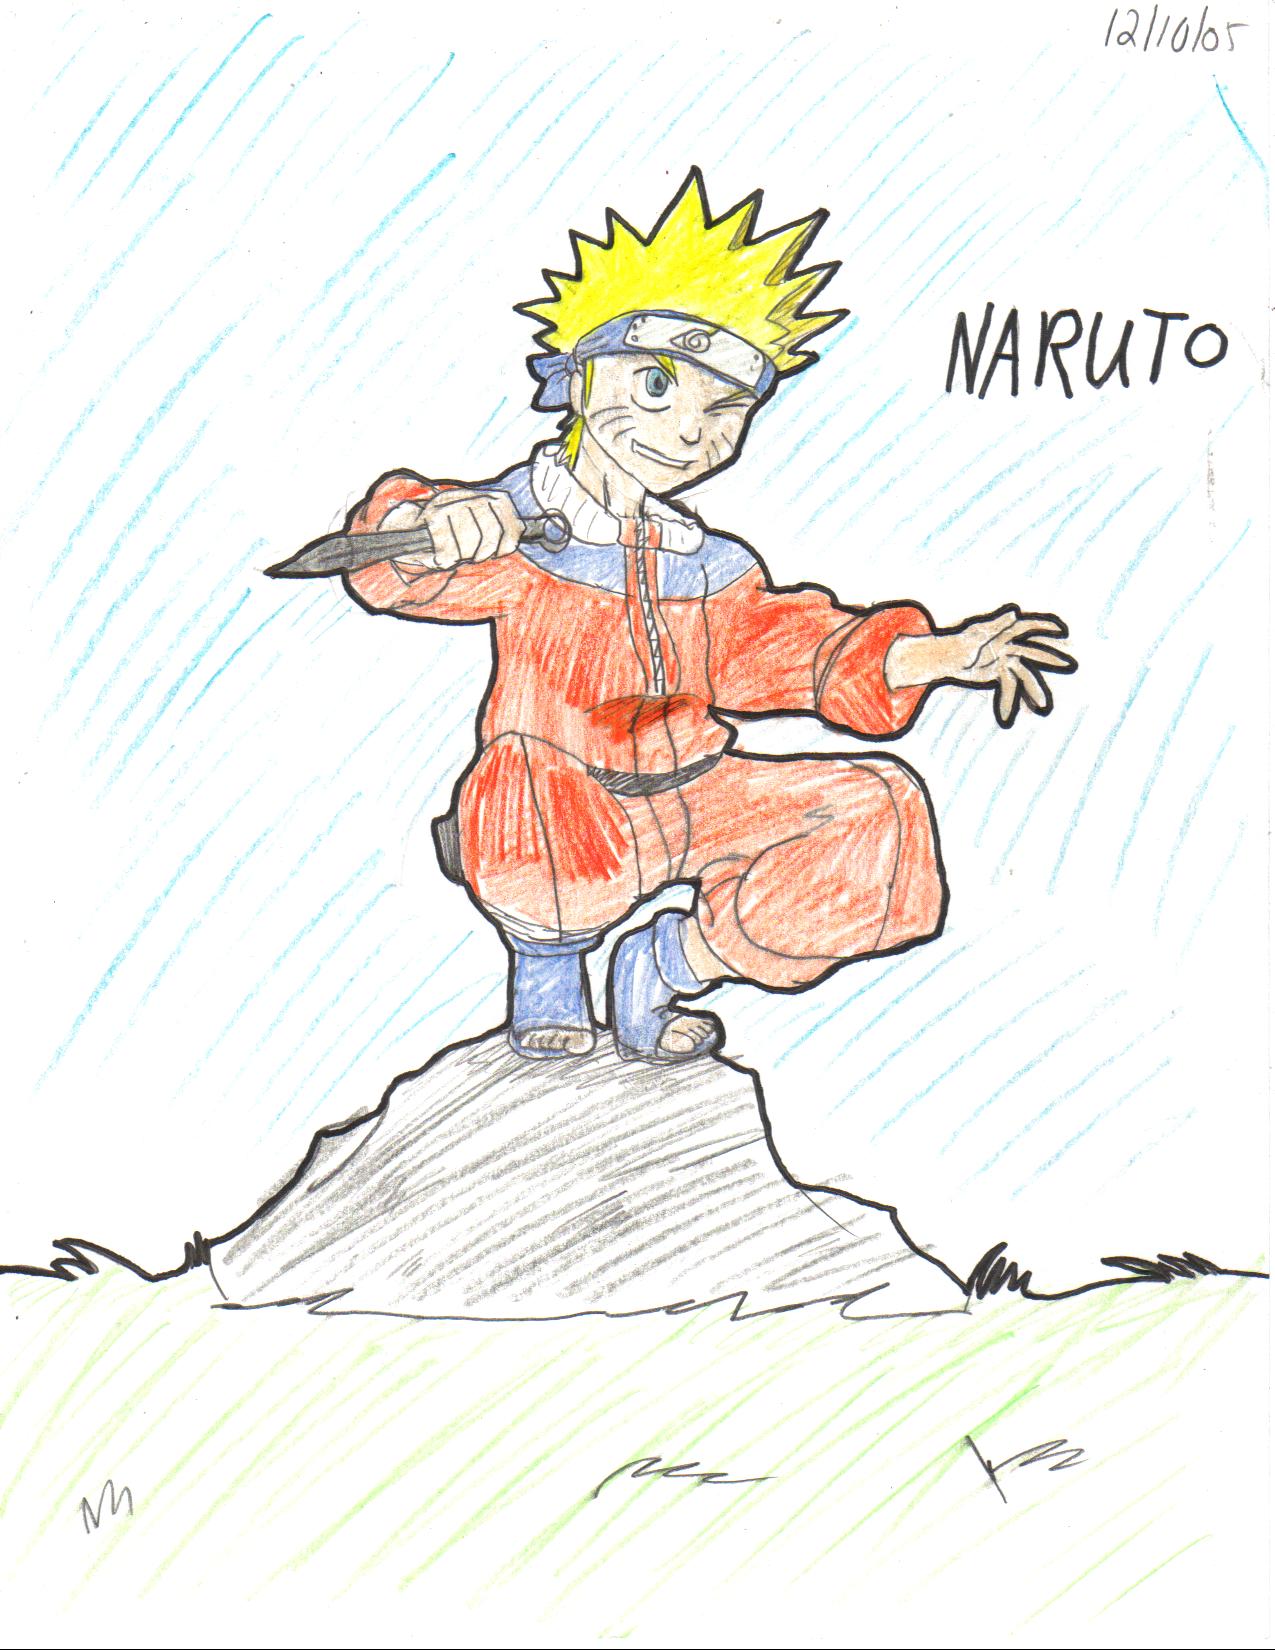 naruto (request for ikickbutt) by crocdragon89